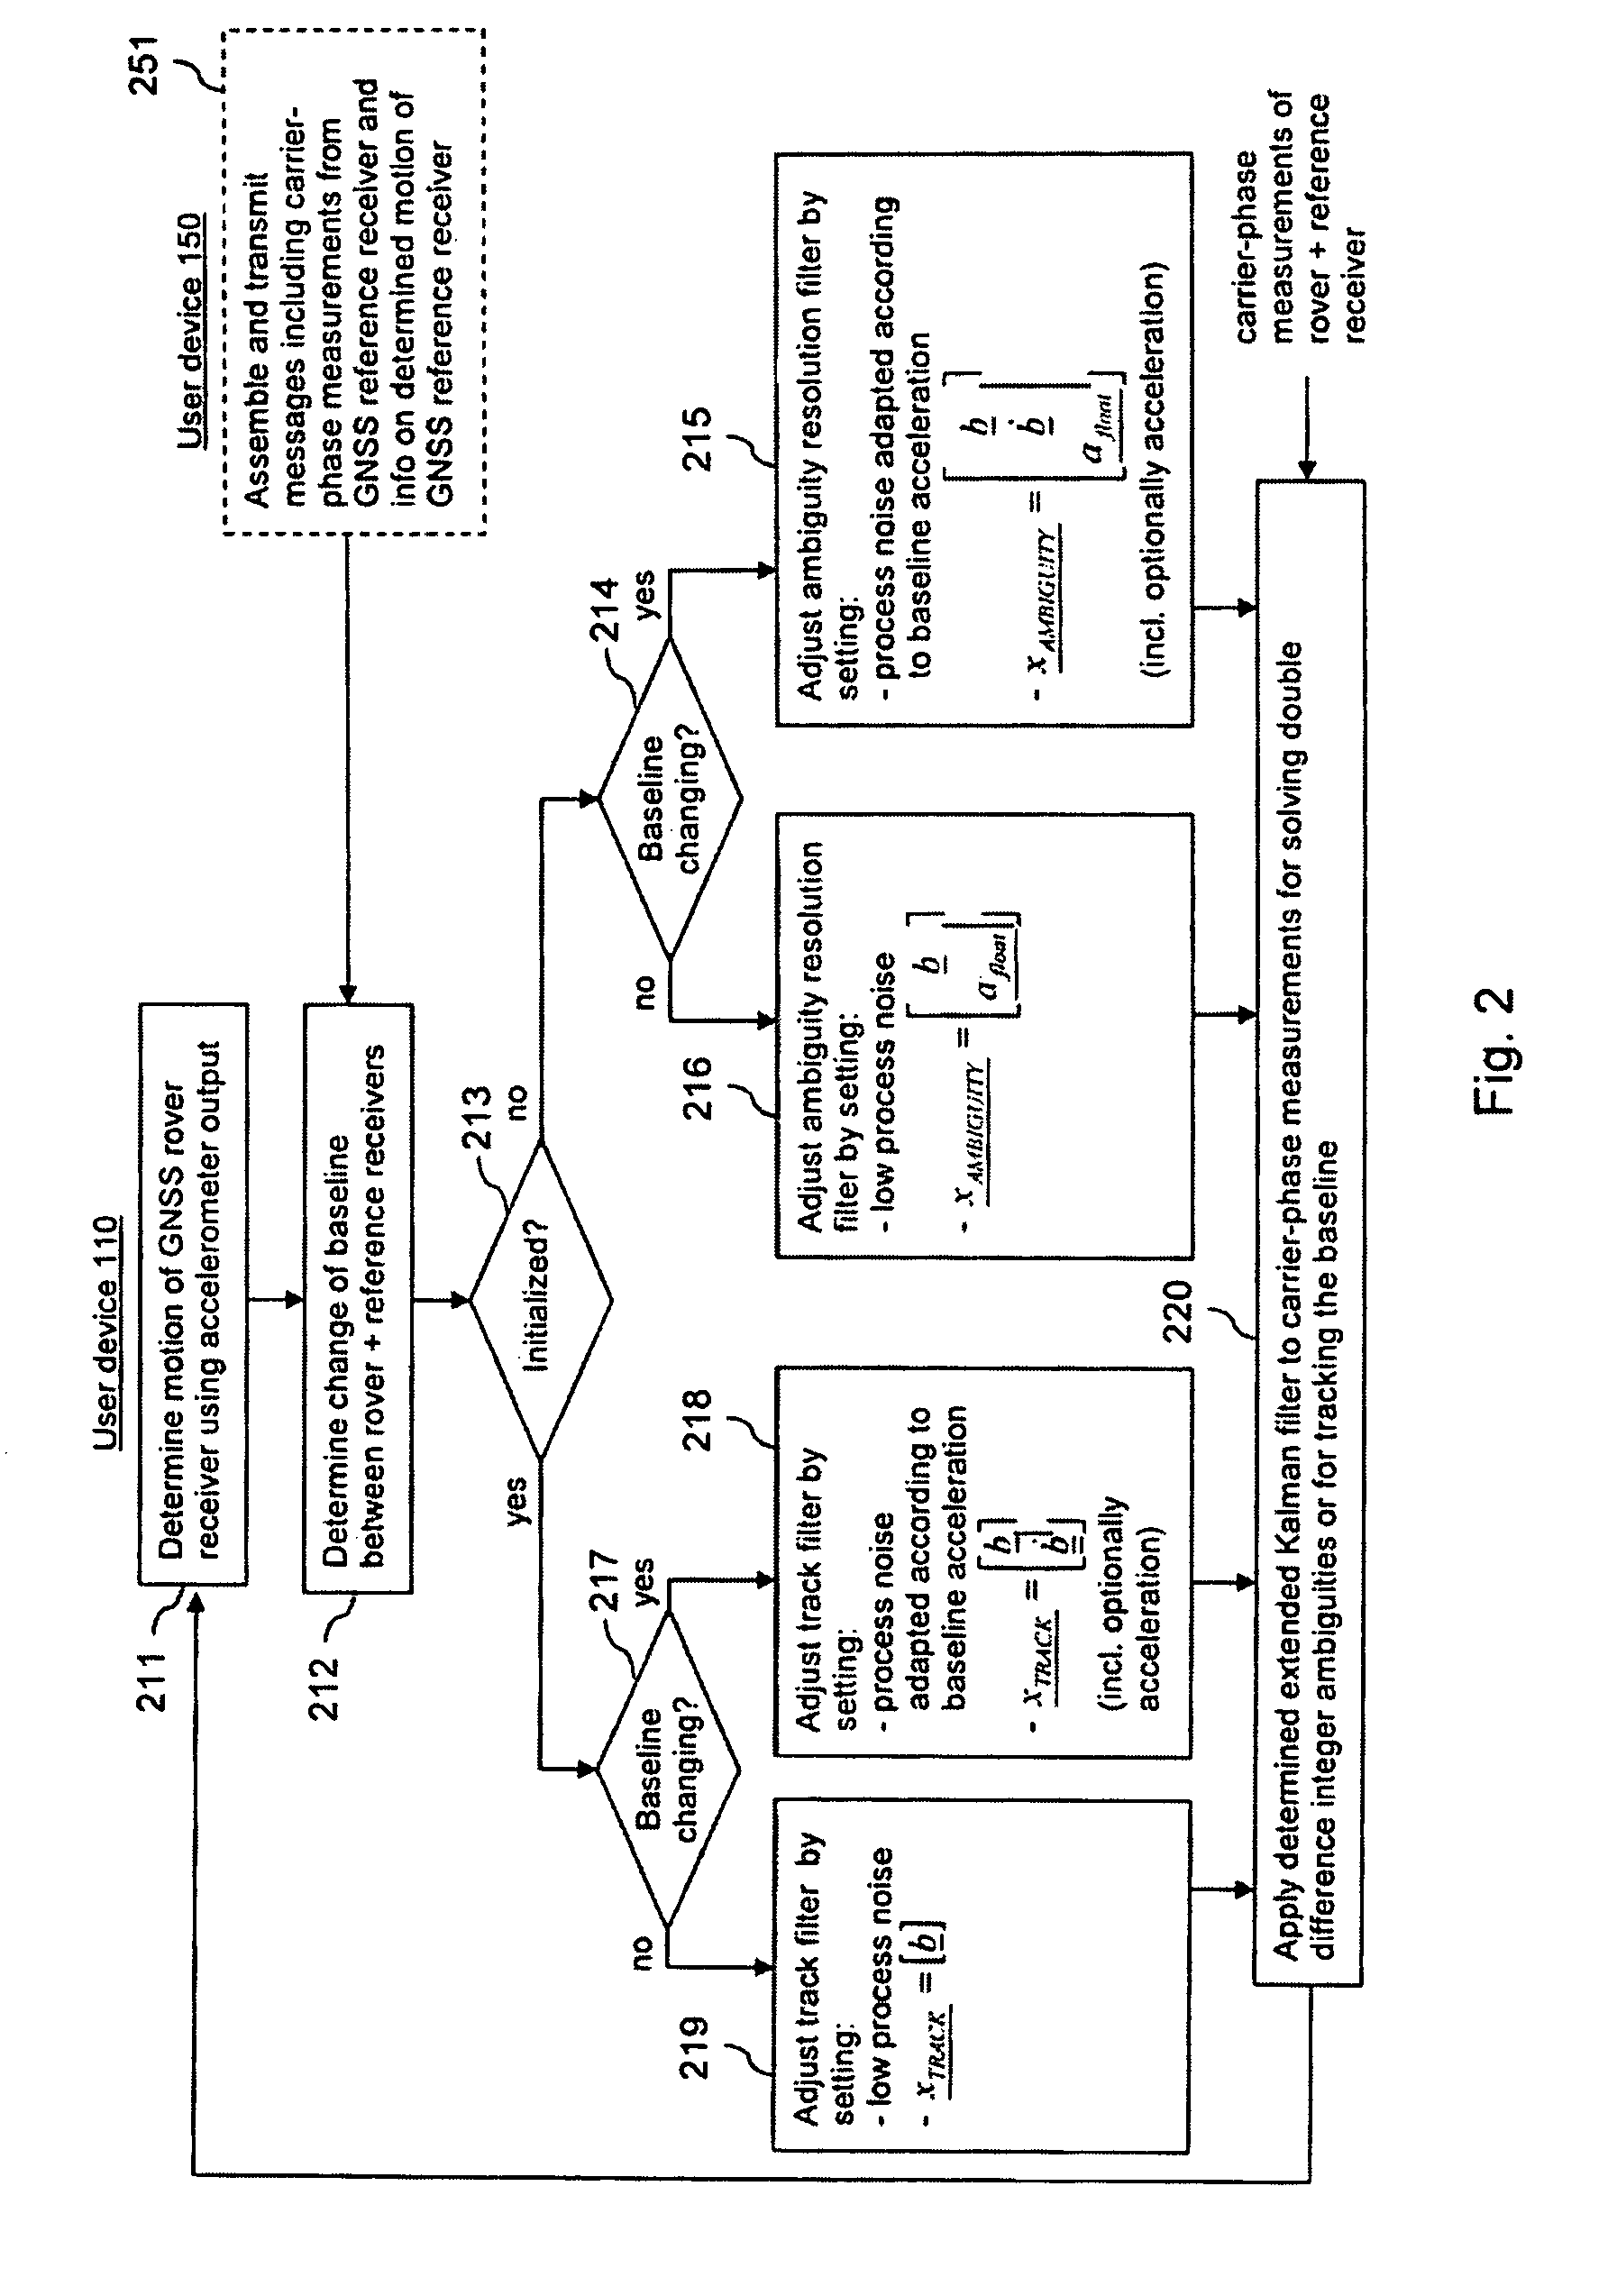 Determination of a relative position of a satellite signal receiver